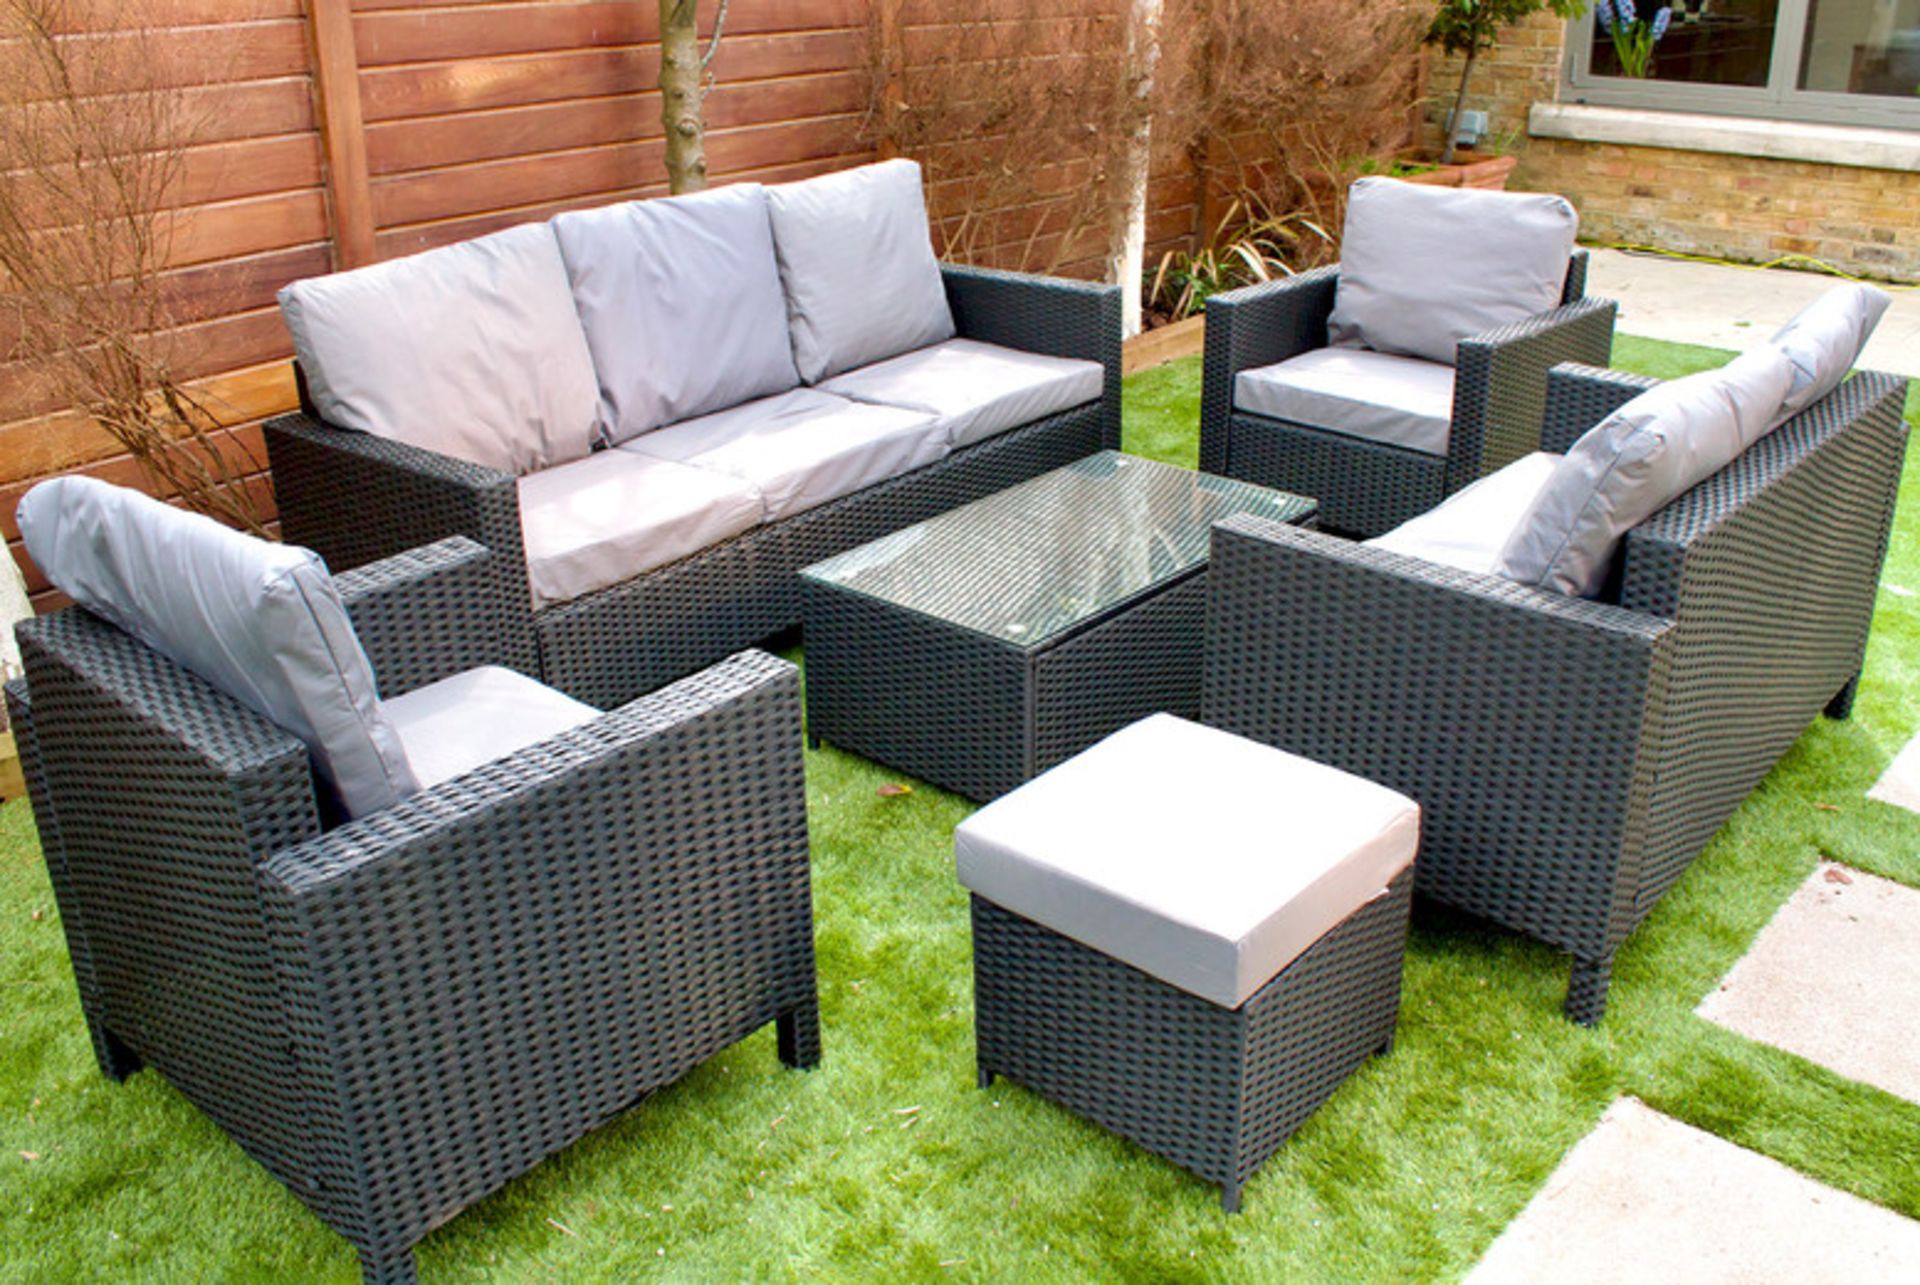 FREE DELIVERY - JOB LOT OF 5X 8-SEATER RATTAN CHAIR & SOFA GARDEN FURNITURE SET - BLACK - Image 2 of 2